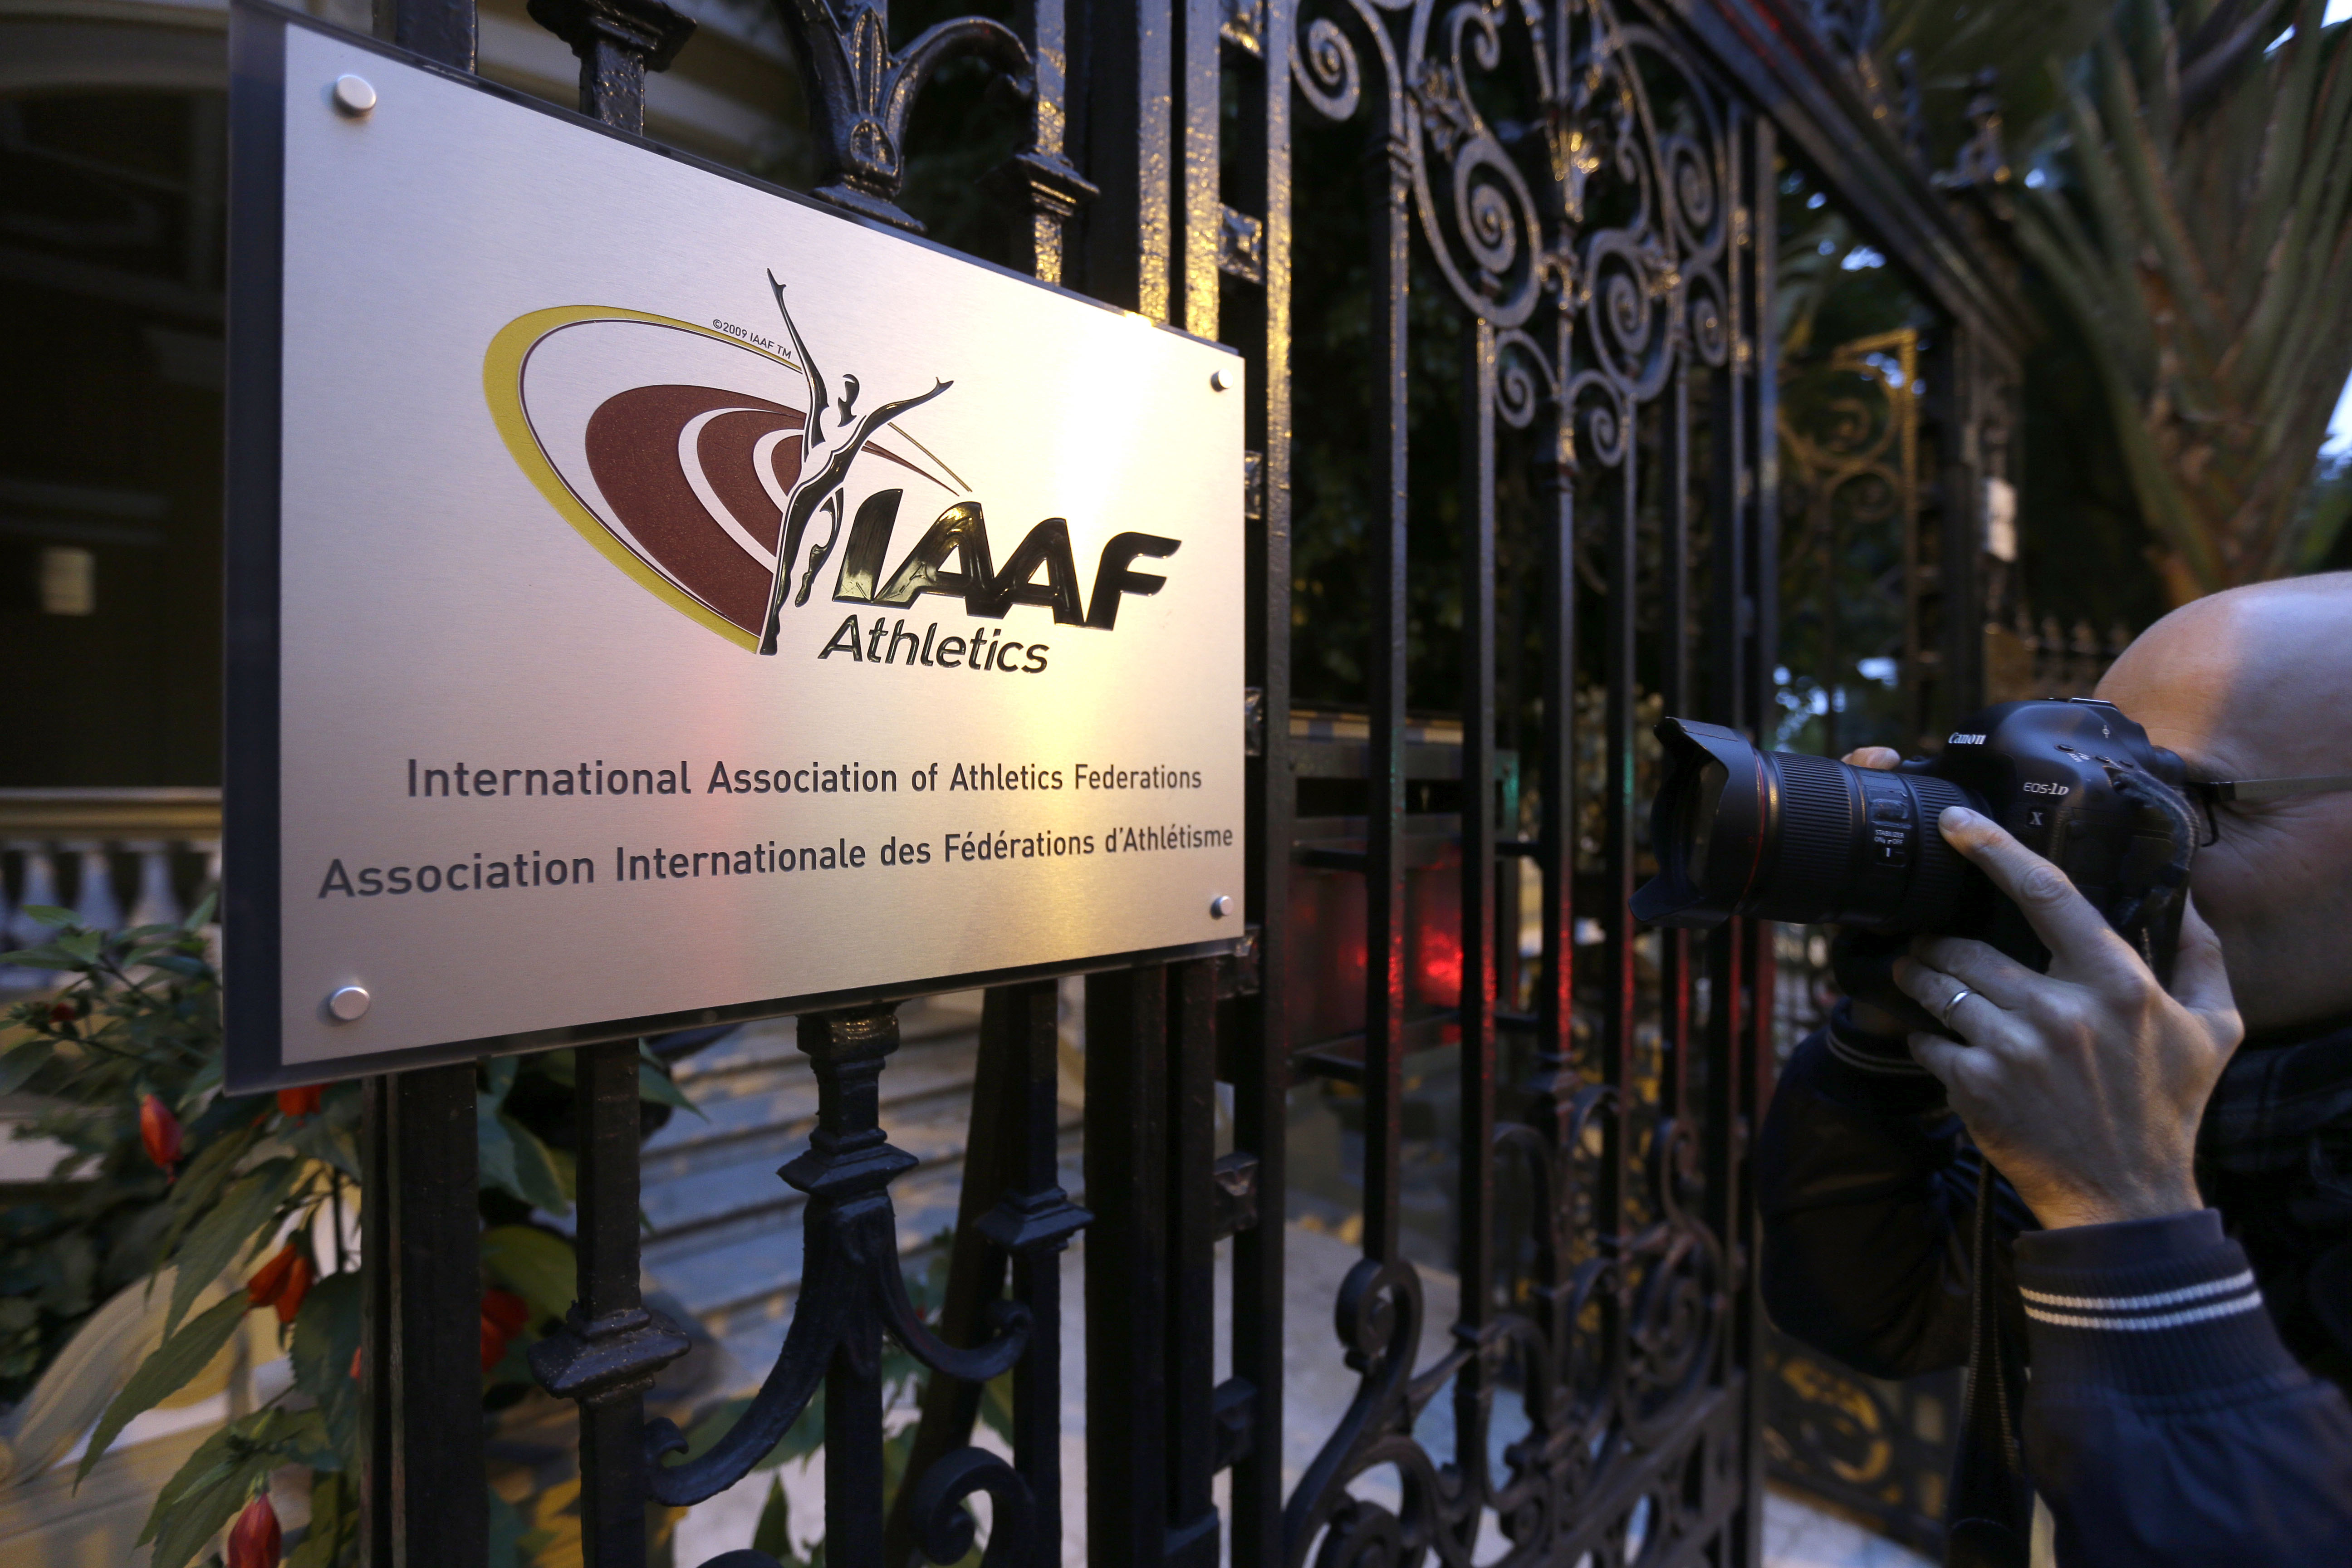 FILE - In this Nov.13, 2015 file photo, a photographer pictures the logo at the IAAF (International Association of Athletics Federations) headquarters in Monaco. French prosecutors have opened an investigation into the decision to award the 2021 track world championships to the American city of Eugene without an open bidding process. (AP Photo/Lionel Cironneau, File)